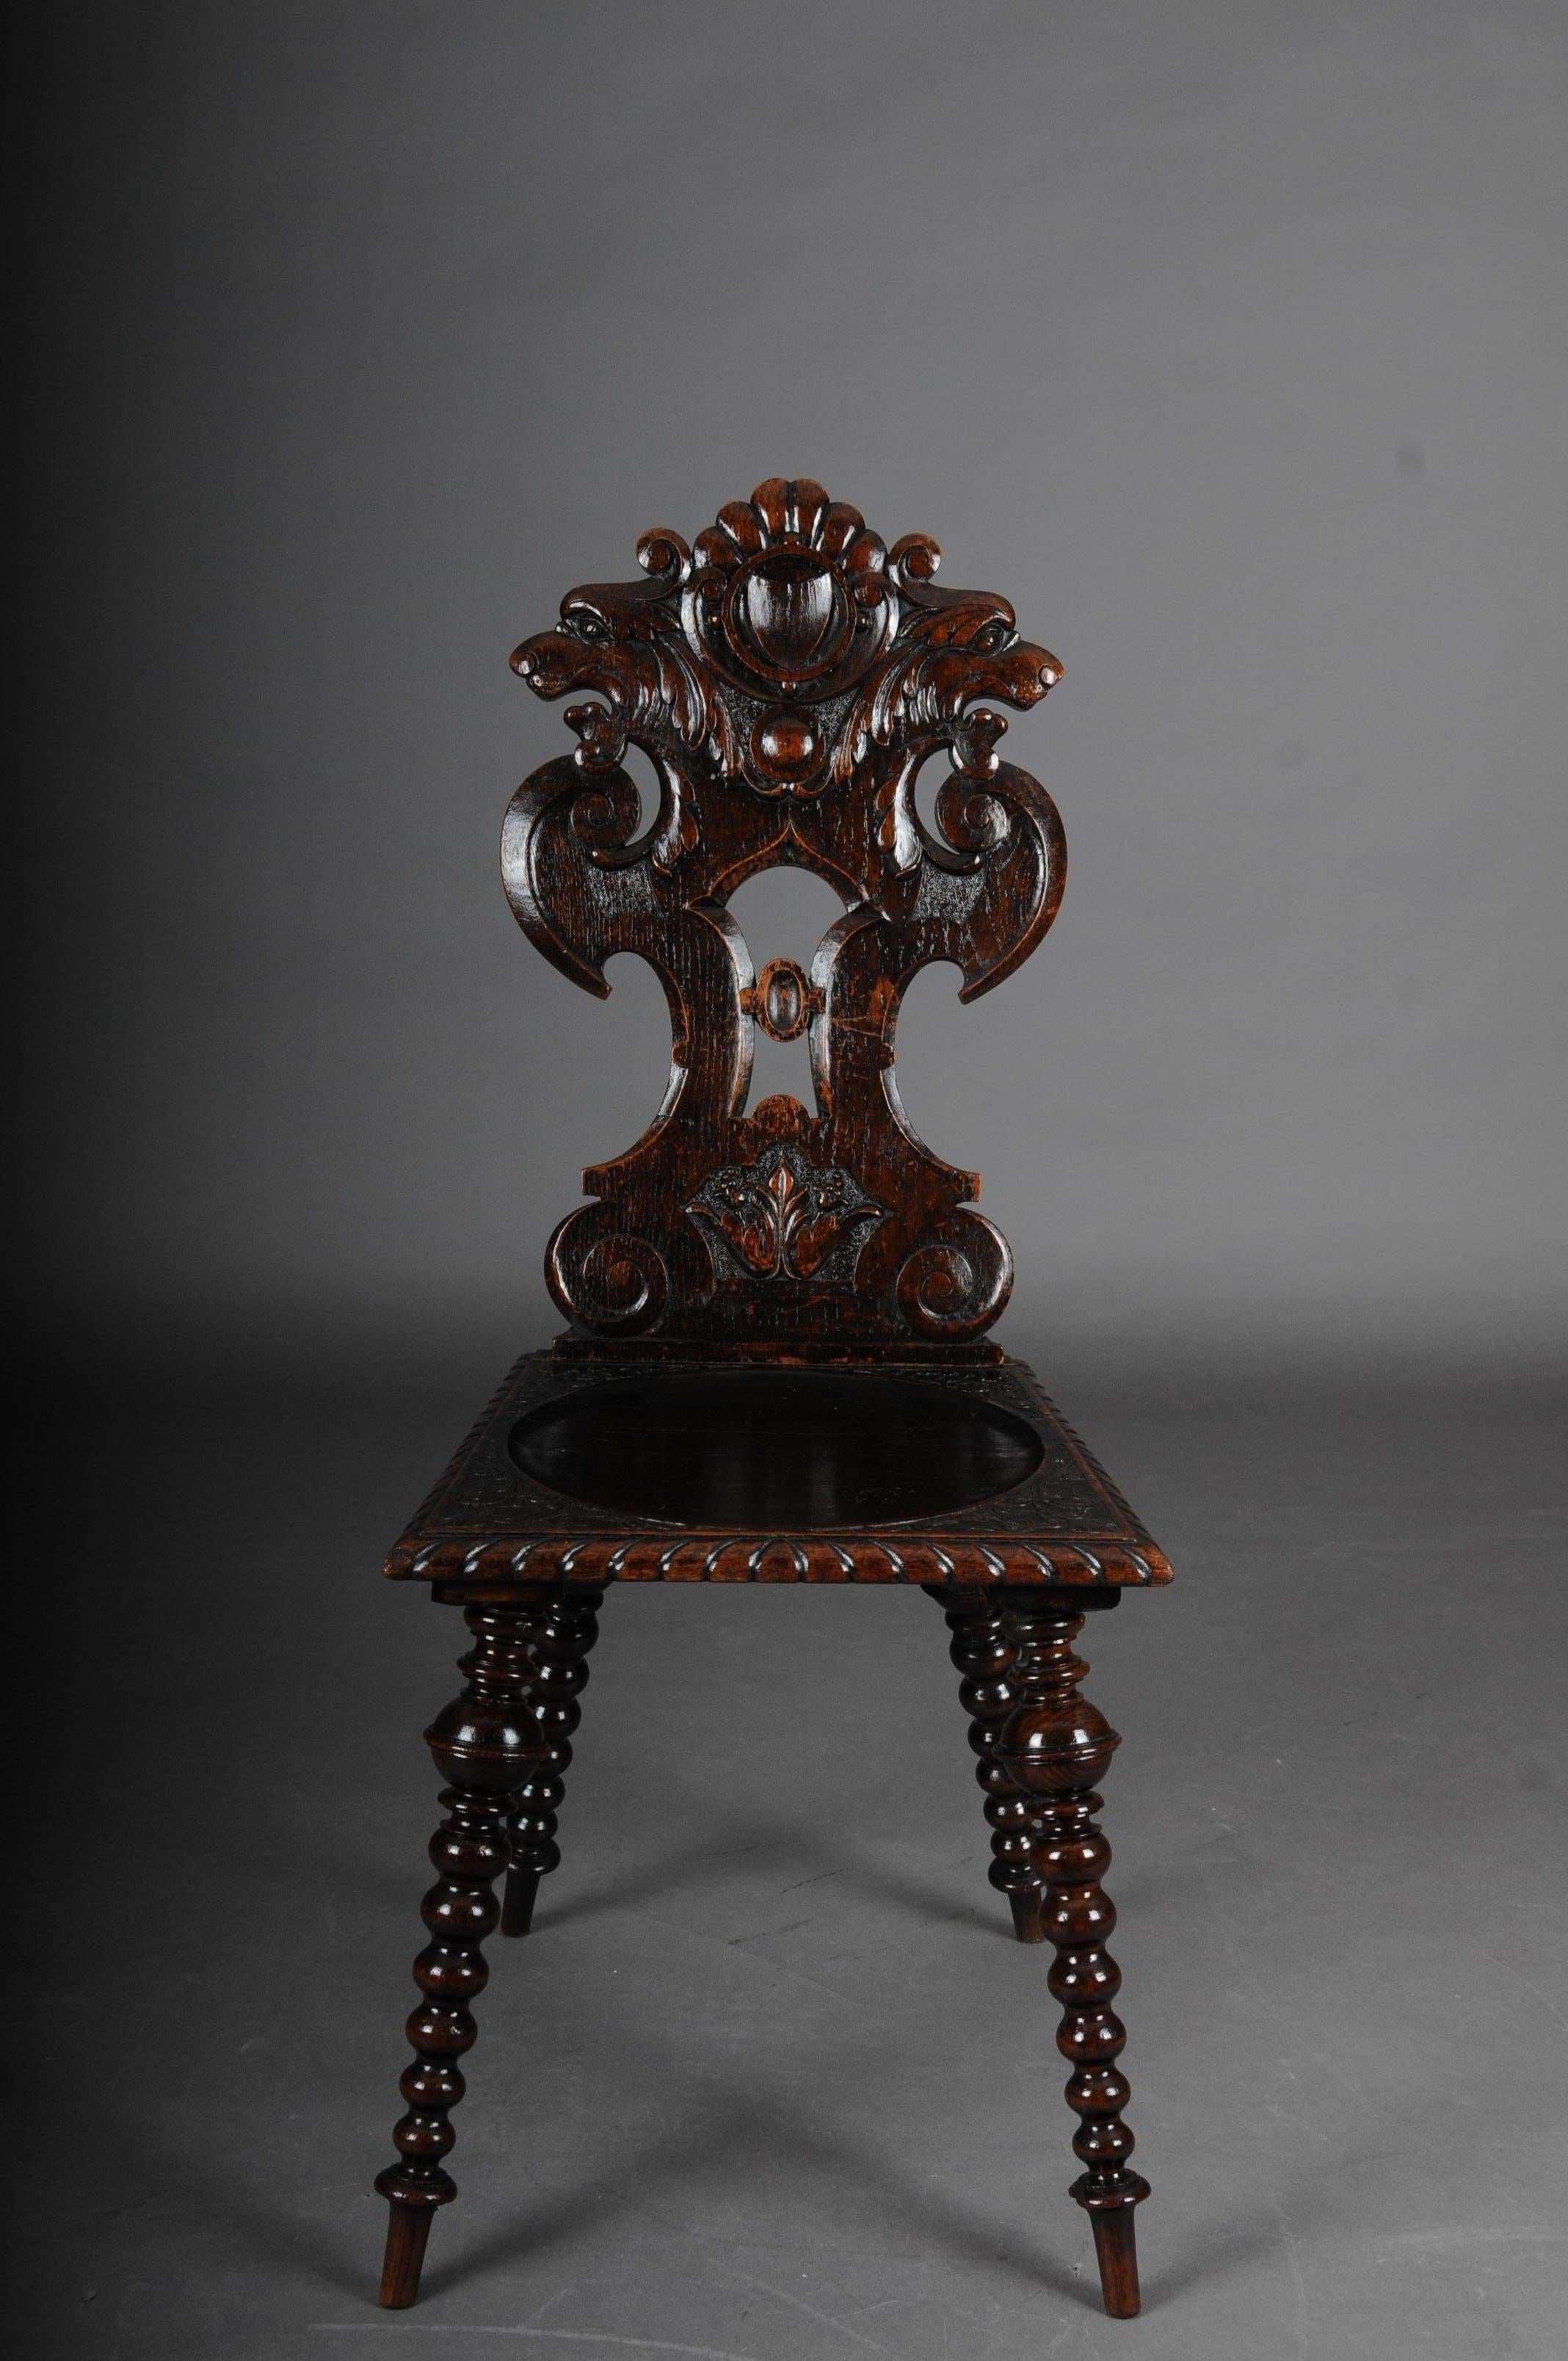 Antique neo Renaissance board chair historicism circa 1870, oak A.

Solid dark oak. Straight seat on turned and tapered legs.
Backrest with sculpted mythical animals. Extremely decorative and rare historicism chairs with rich carving.

(C-154).